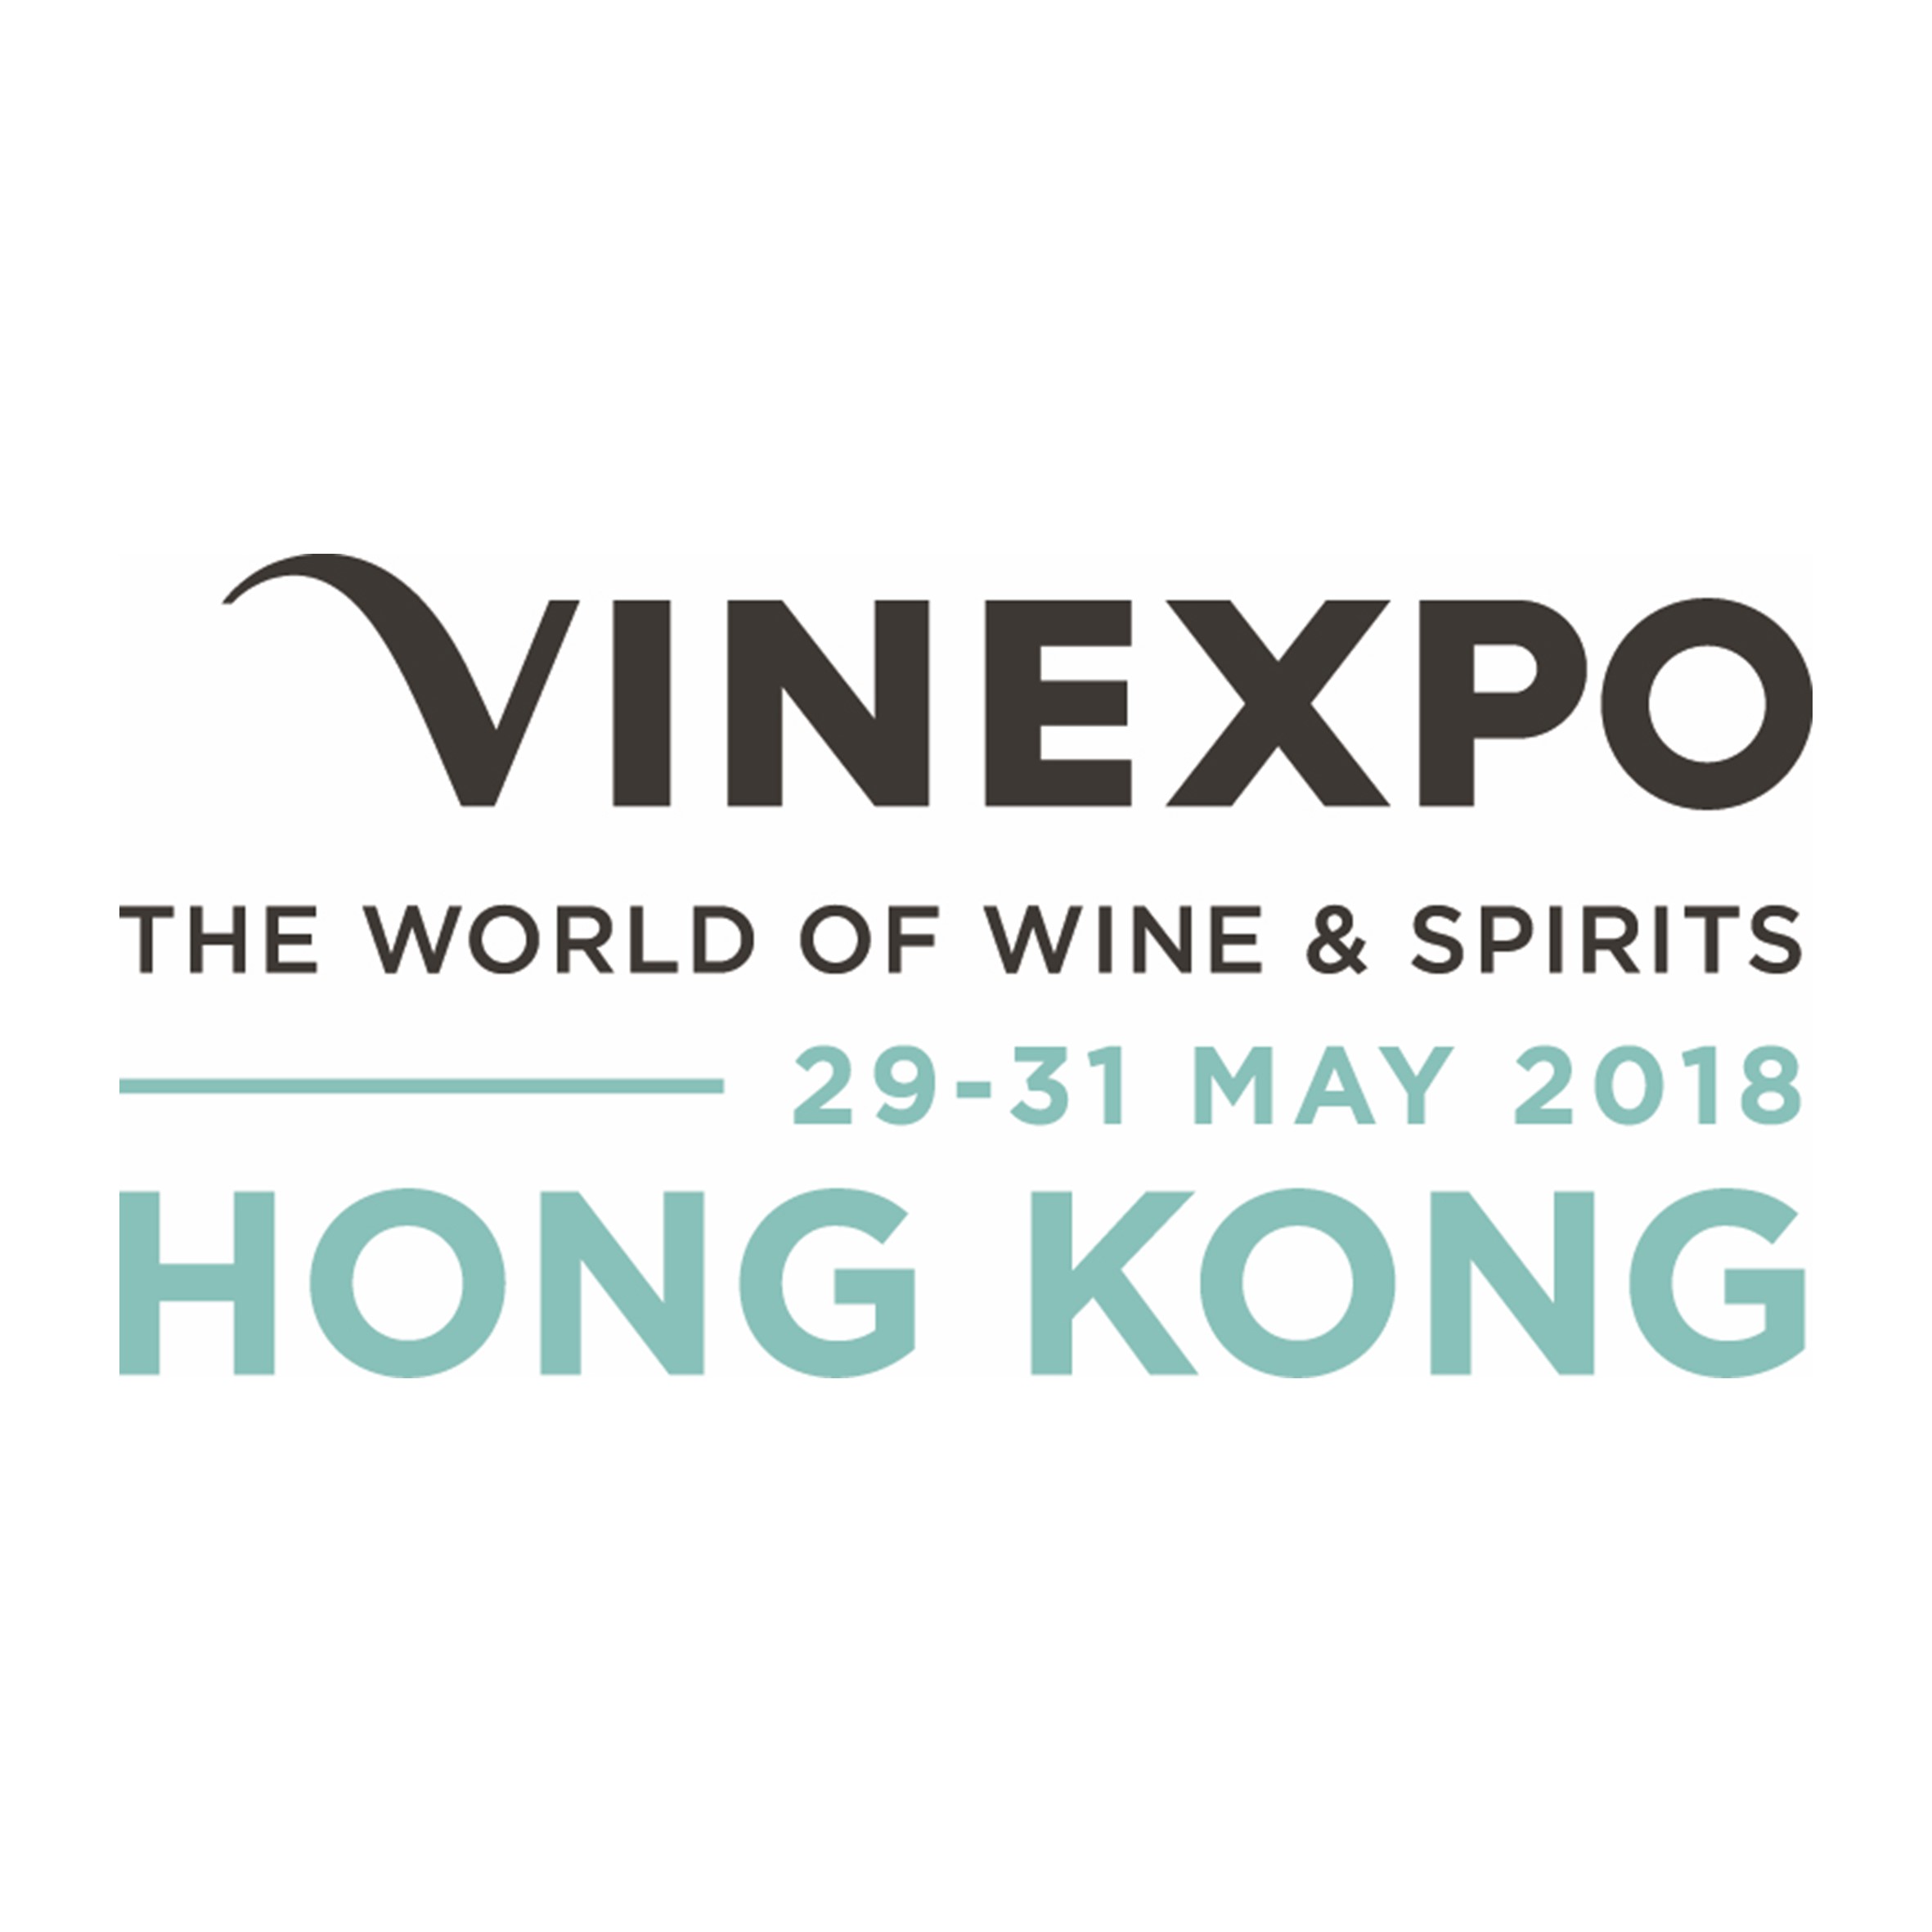 Vinexpo Hong Kong Logo 2018 - Swedish wine drinkers associate organic wine with being better for one’s health, and sustainable wine with being more prestigious and expensive